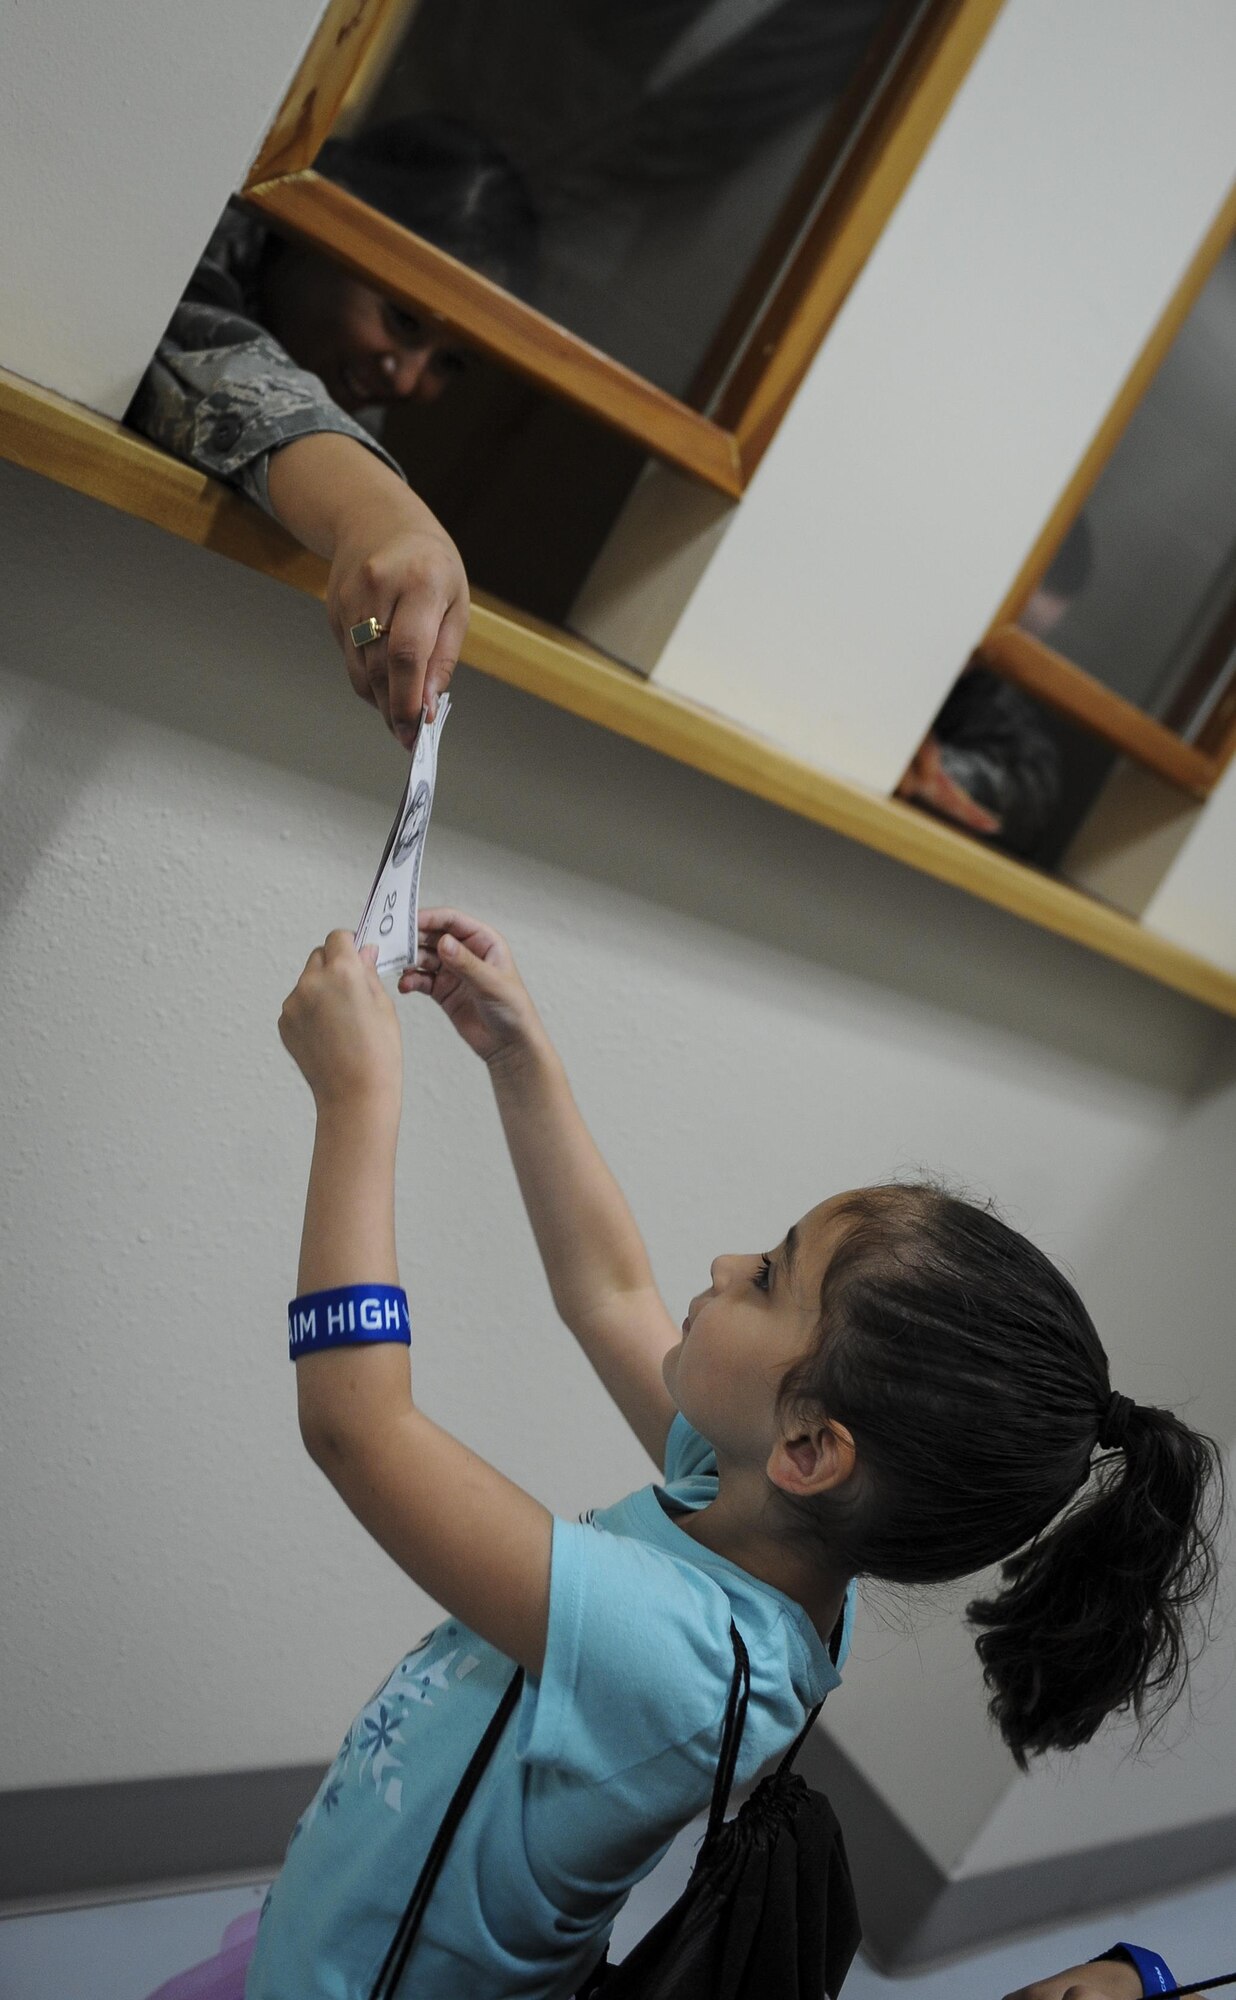 Airman 1st Class Alondra Gonzales Arroyo, a financial services technician with the 1st Special Operations Comptroller Squadron, hands a military child imitation money as part of a deployment line during Operation Kids Understanding Deployment Operations at Hurlburt Field, Fla., April 30, 2016. Operation KUDOS is an educational event aimed to help build resiliency in military youth by engaging them in activities that simulate the pre-deployment experience, such as pre-deployment lines and demonstrations and games held by multiple squadrons around Hurlburt. The event concluded with a “homecoming” where parents welcomed back their children. (U.S. Air Force photo by Senior Airman Meagan Schutter)